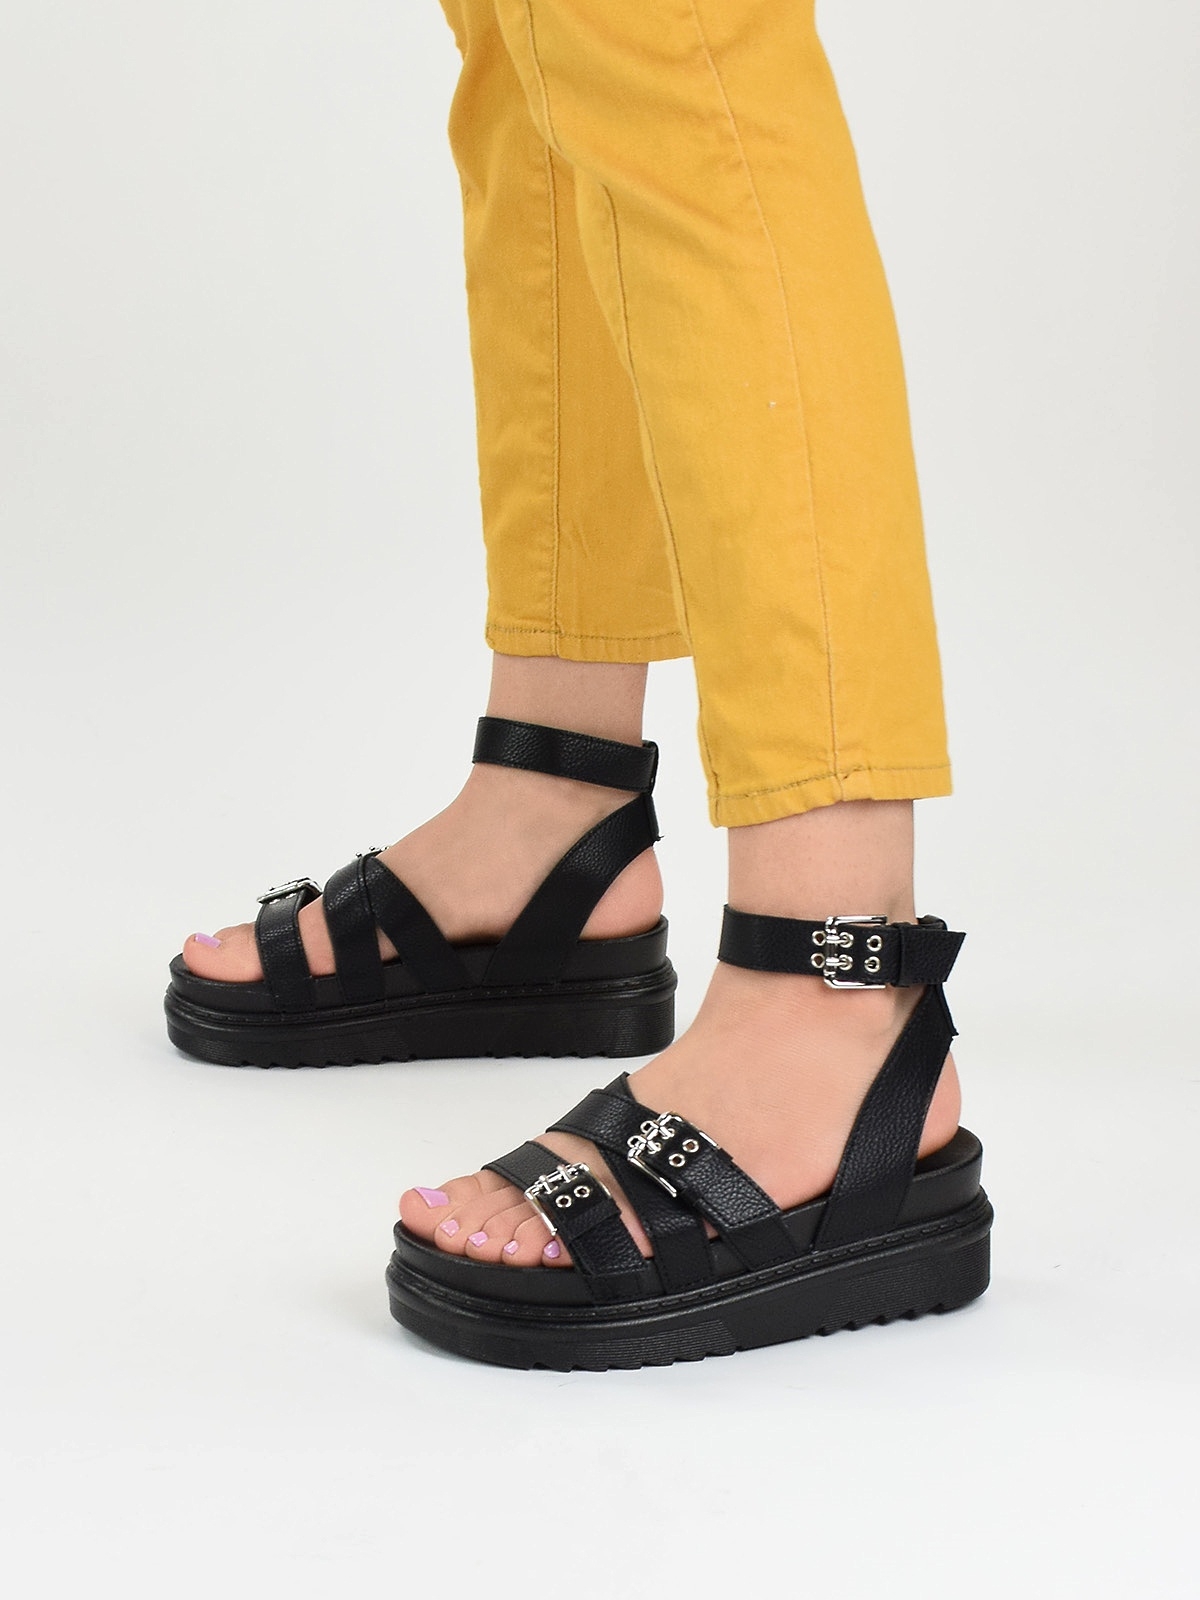 Chunky flat sandals with buckle straps in black